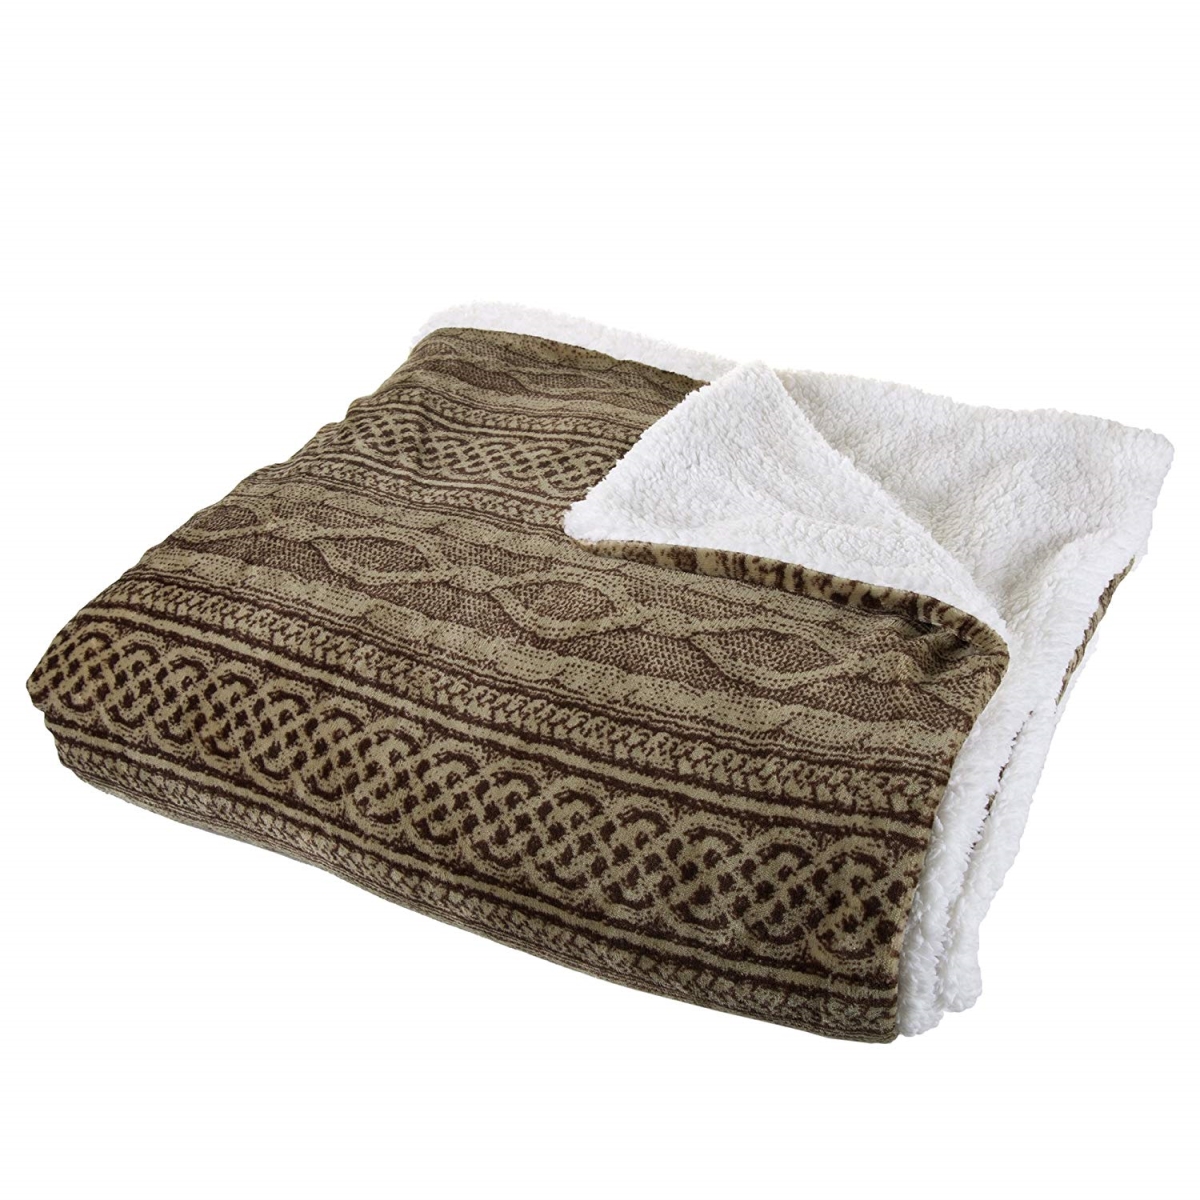 61a-01220 Flannel Sherpa Blanket, King Size - Chocolate Taupe